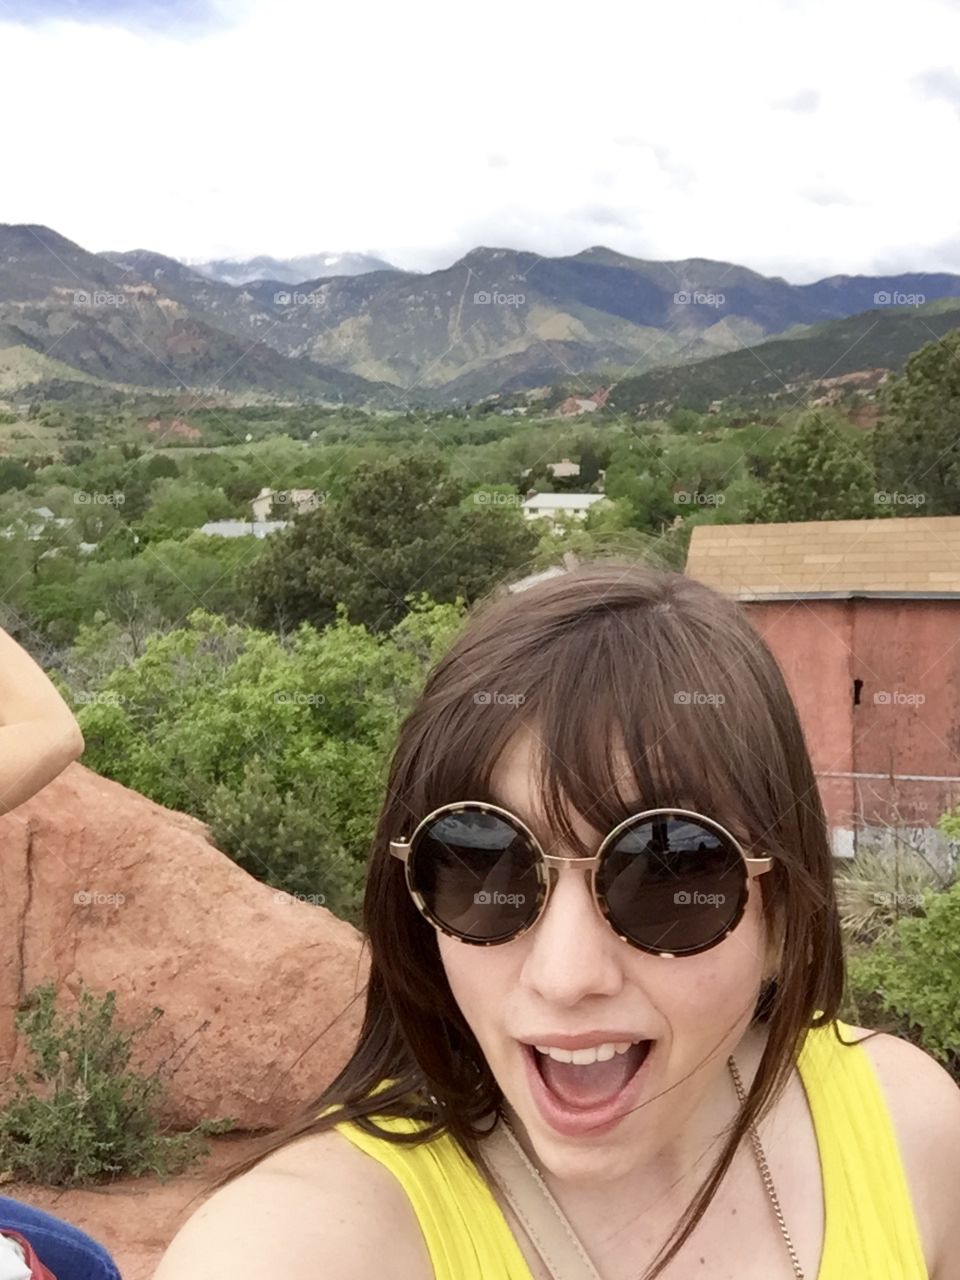 Selfie with the beautiful mountains in Manitou Springs, Colorado. I’m wearing my Raen sunnies and a smile. 